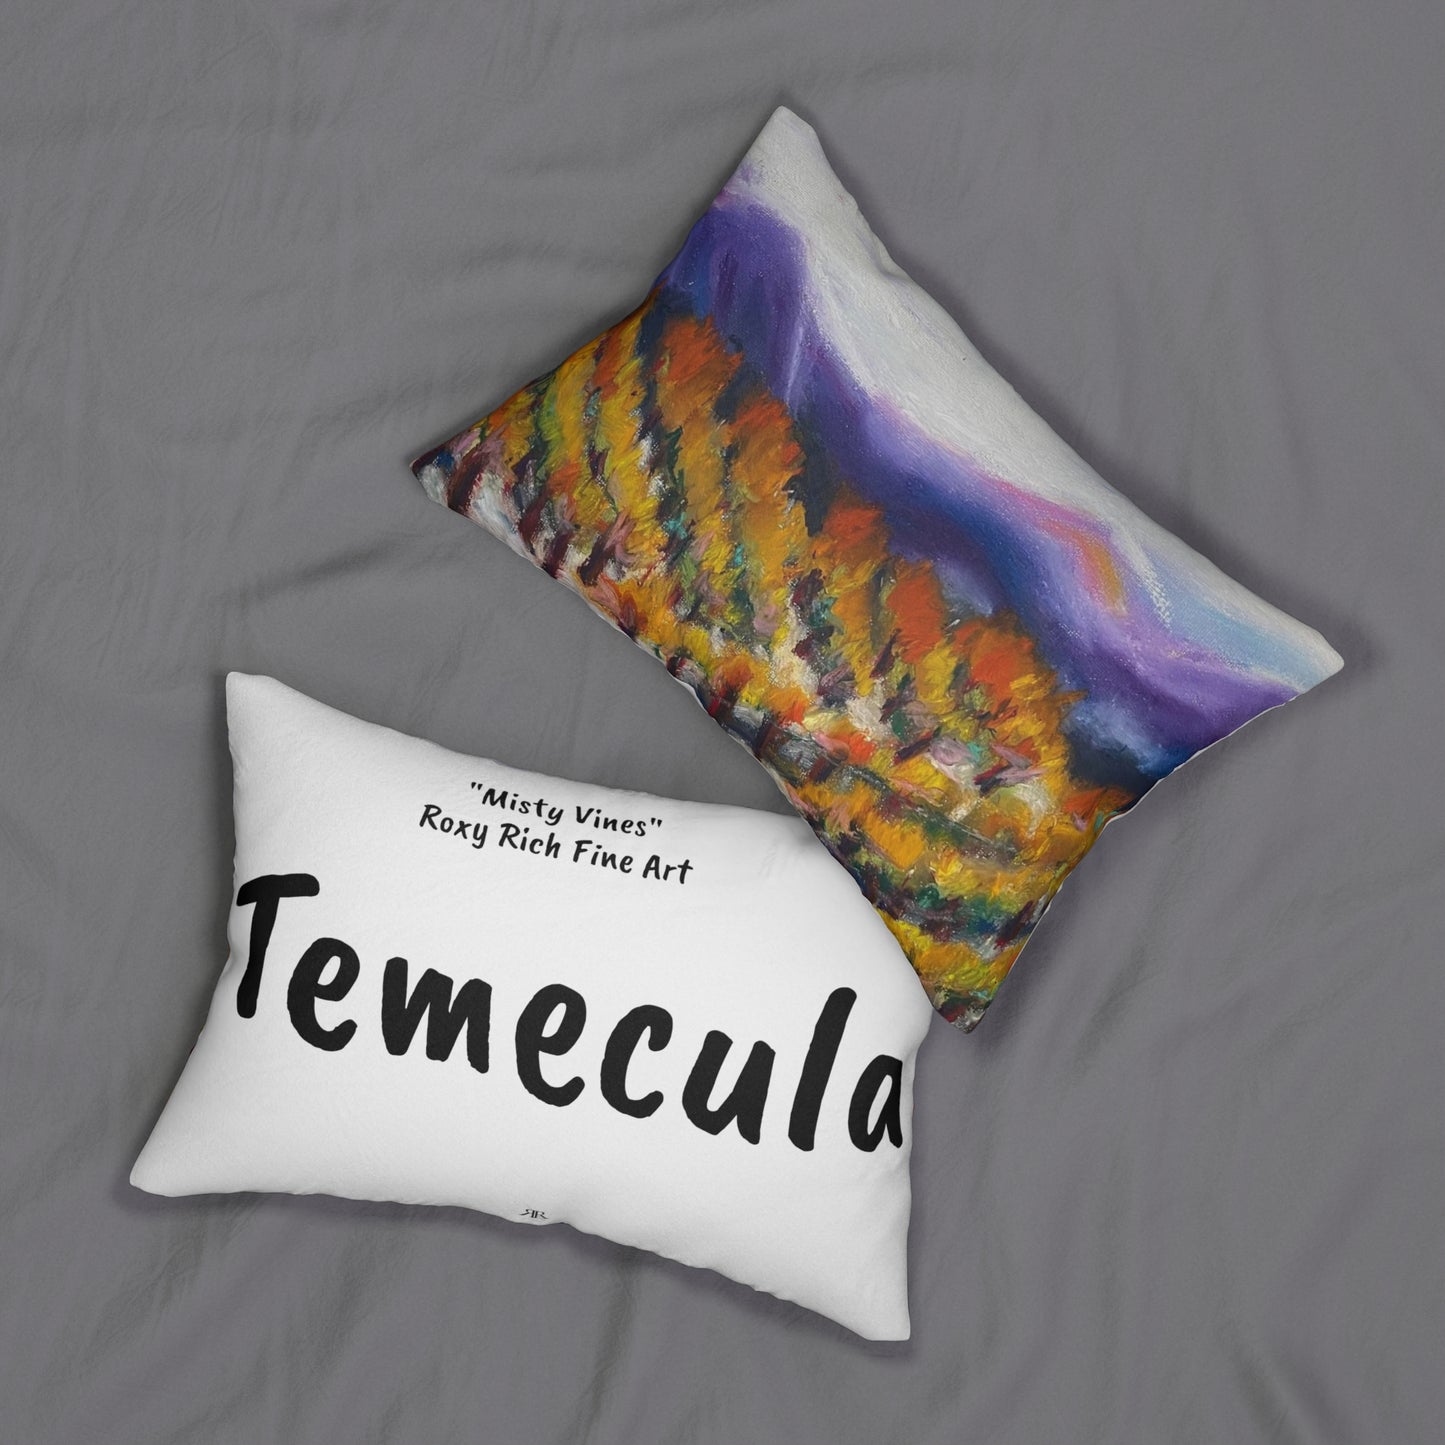 Temecula Lumbar Pillow featuring "Misty Vines" Roxy Rich Fine Art and "Temecula"